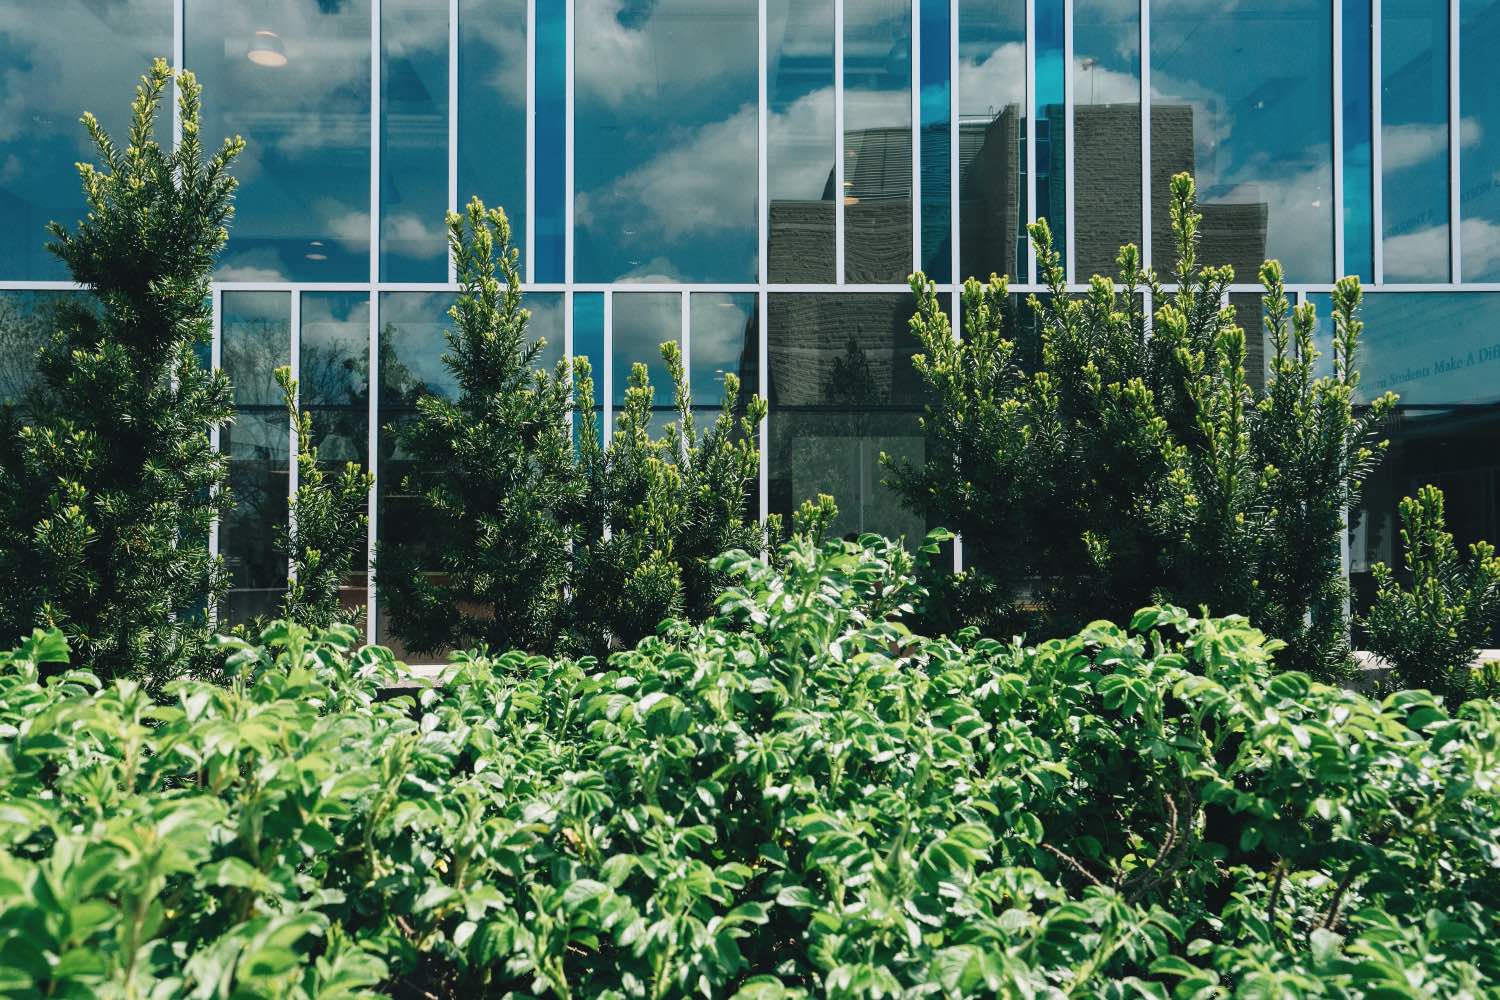 trees and shrubs in front of glass buildings